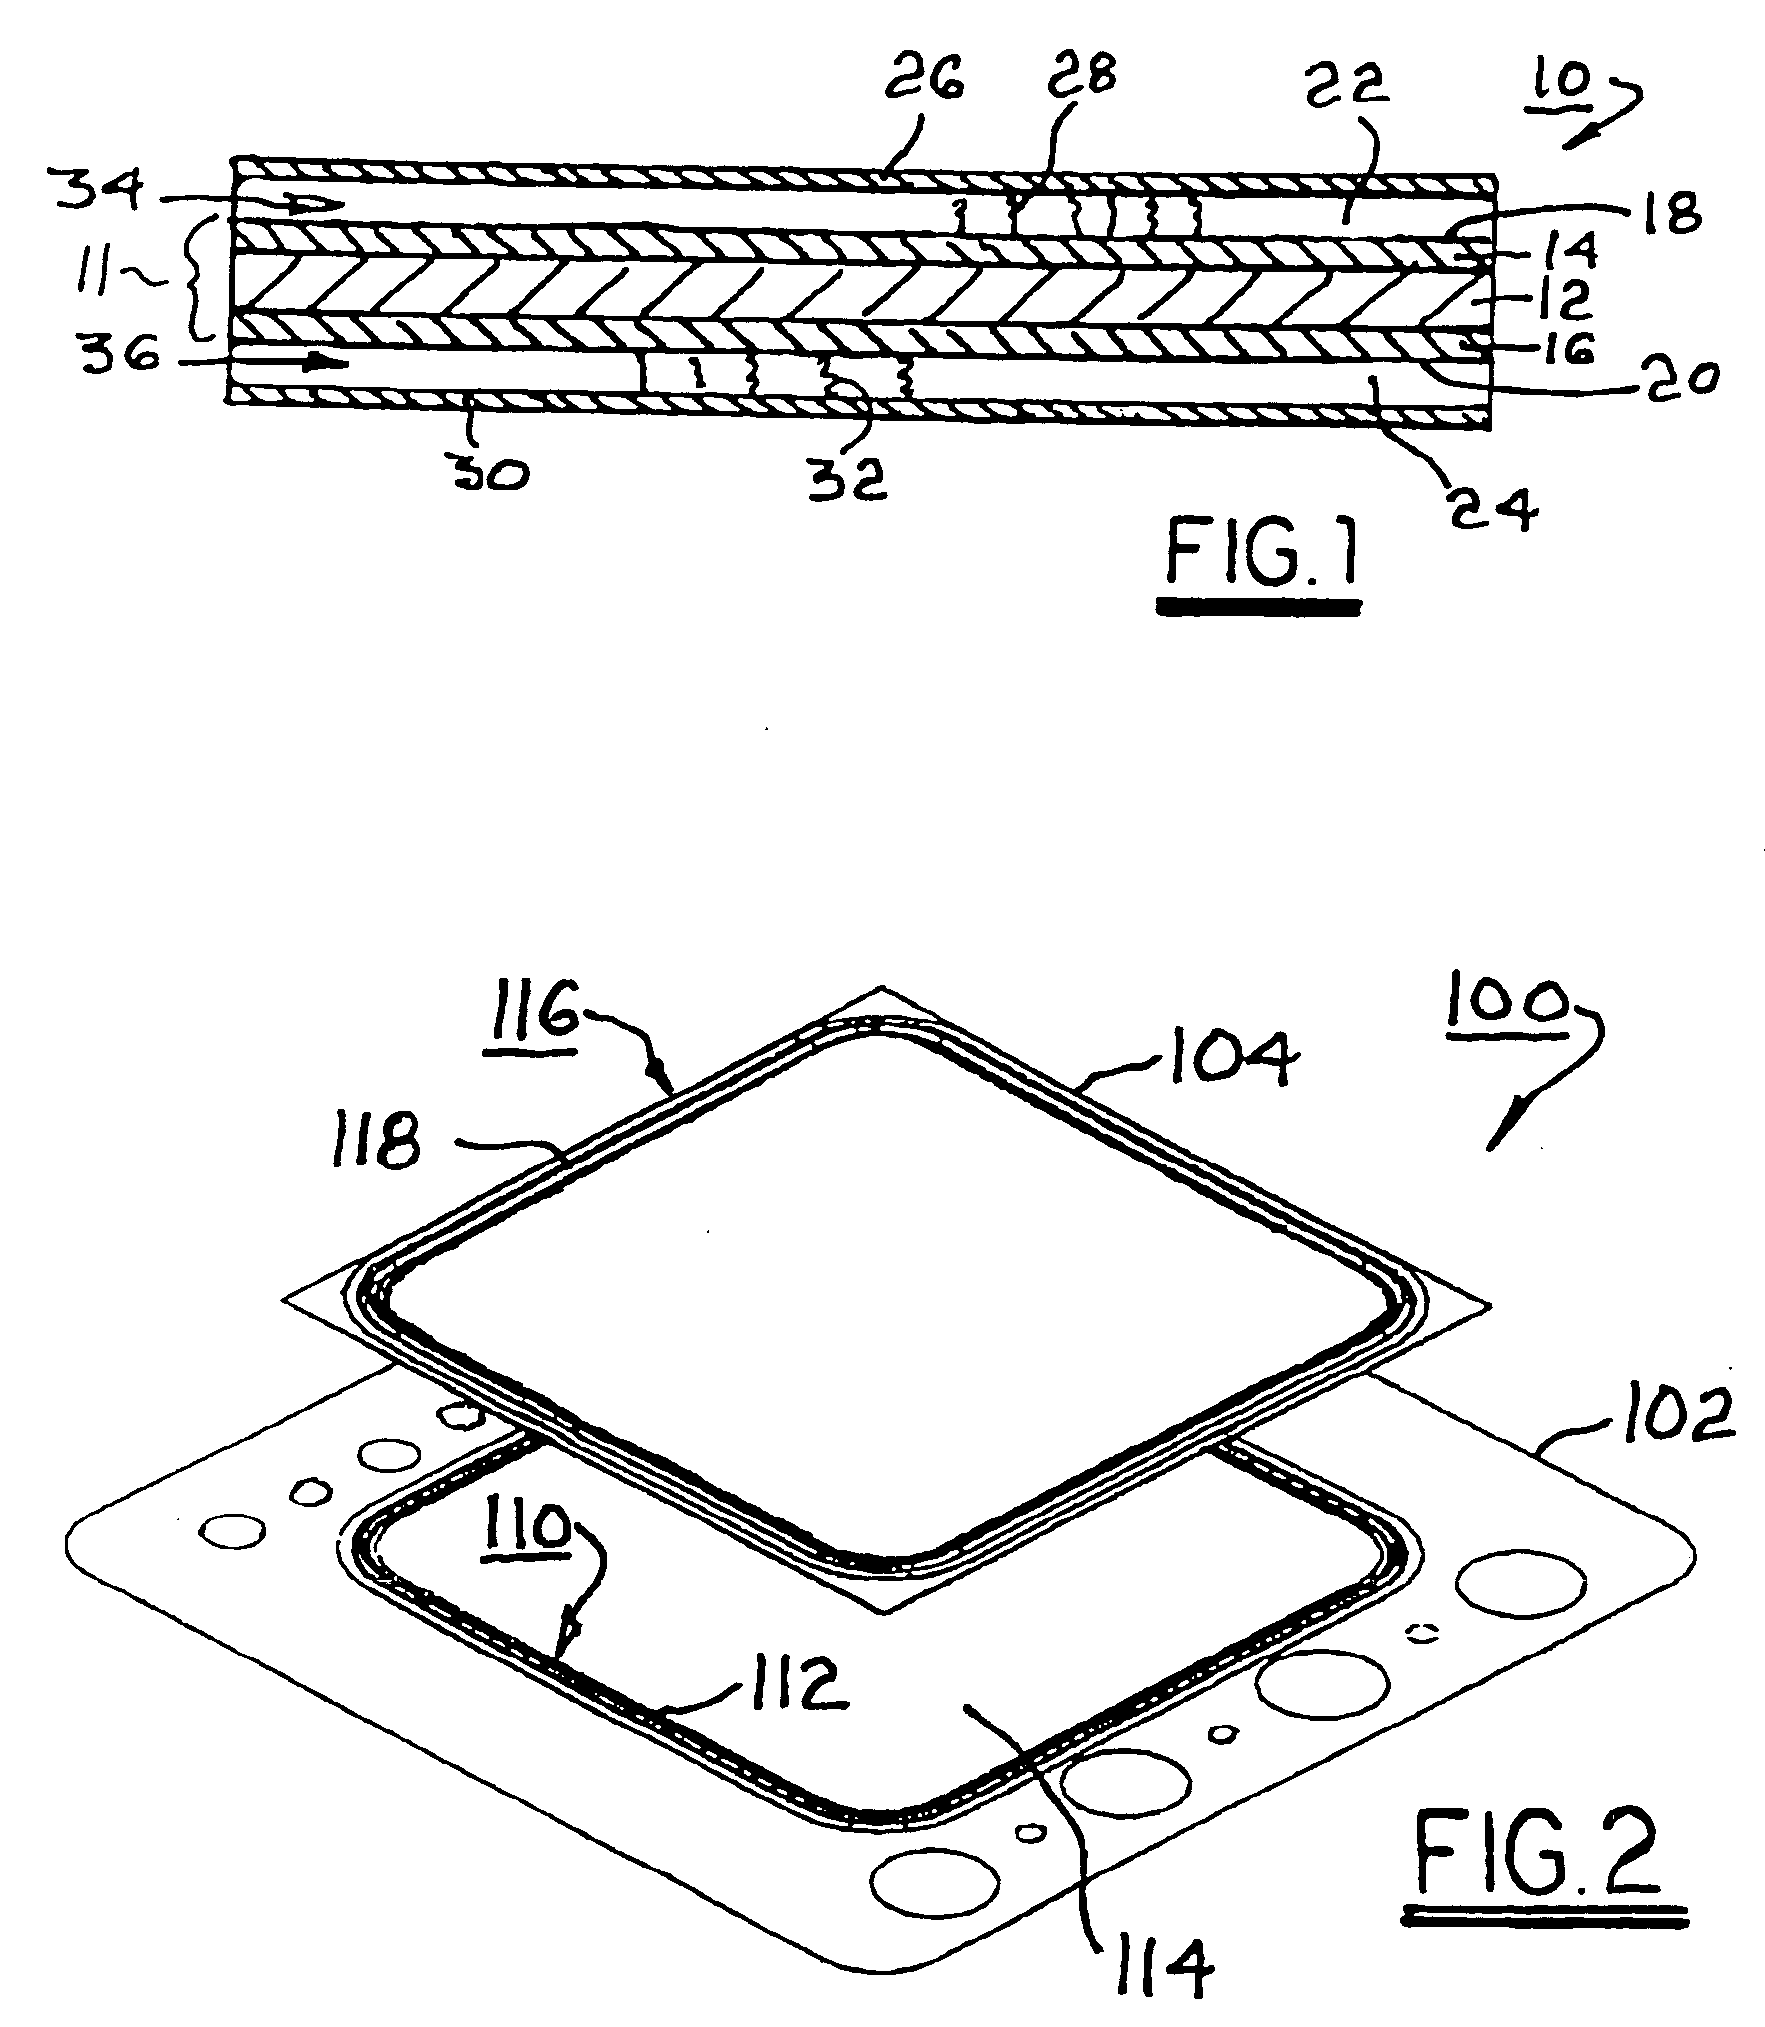 Hybrid interconnect for a solid-oxide fuel cell stack